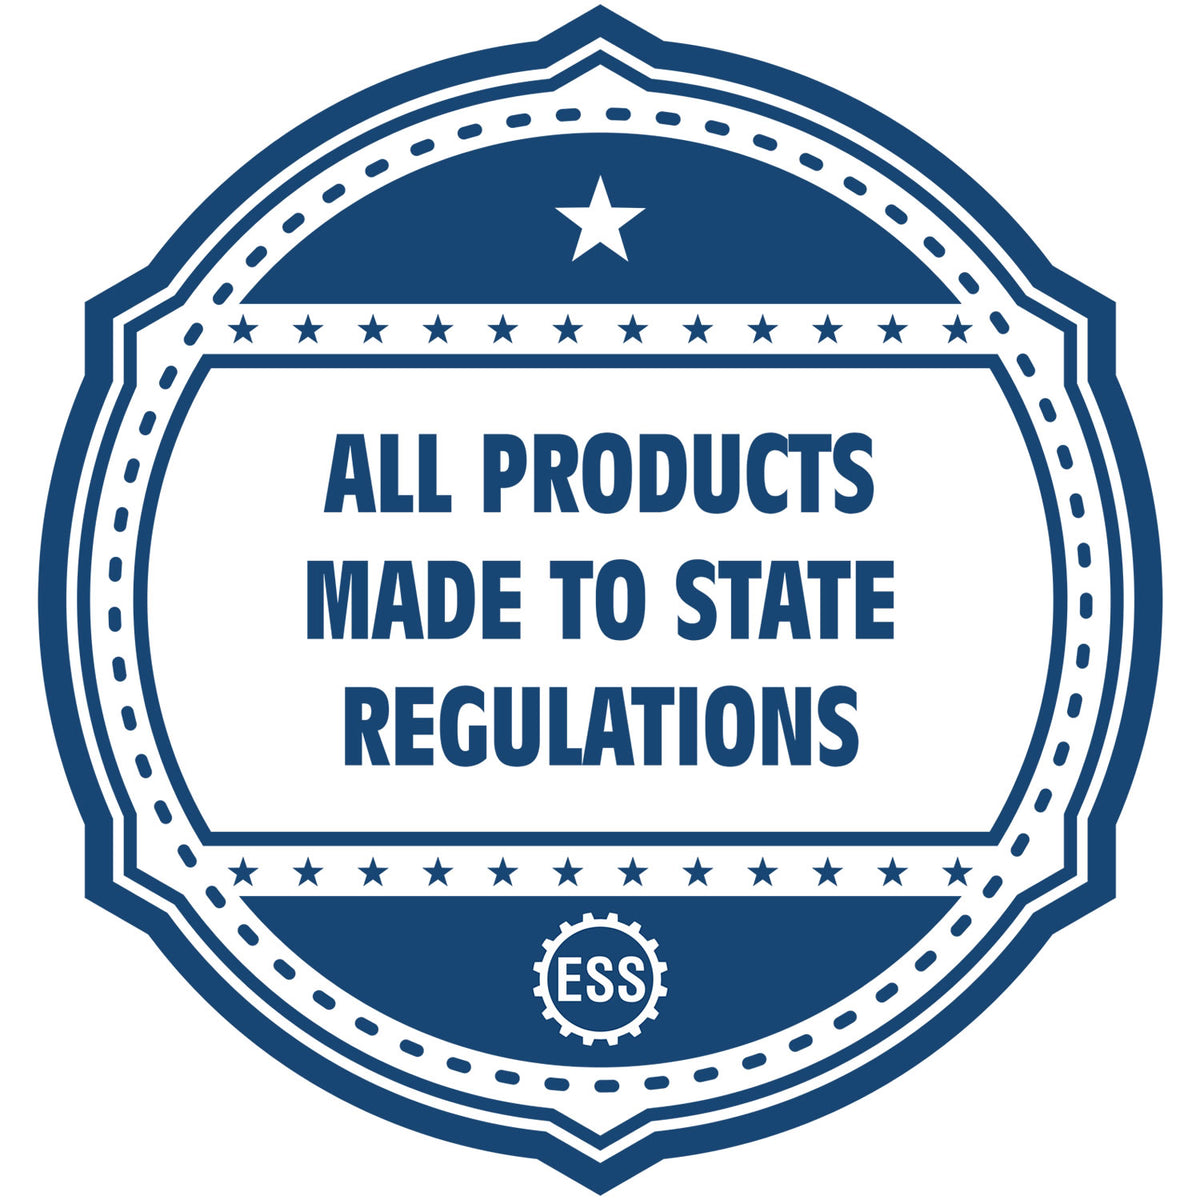 An icon or badge element for the Wyoming Professional Engineer Seal Stamp showing that this product is made in compliance with state regulations.